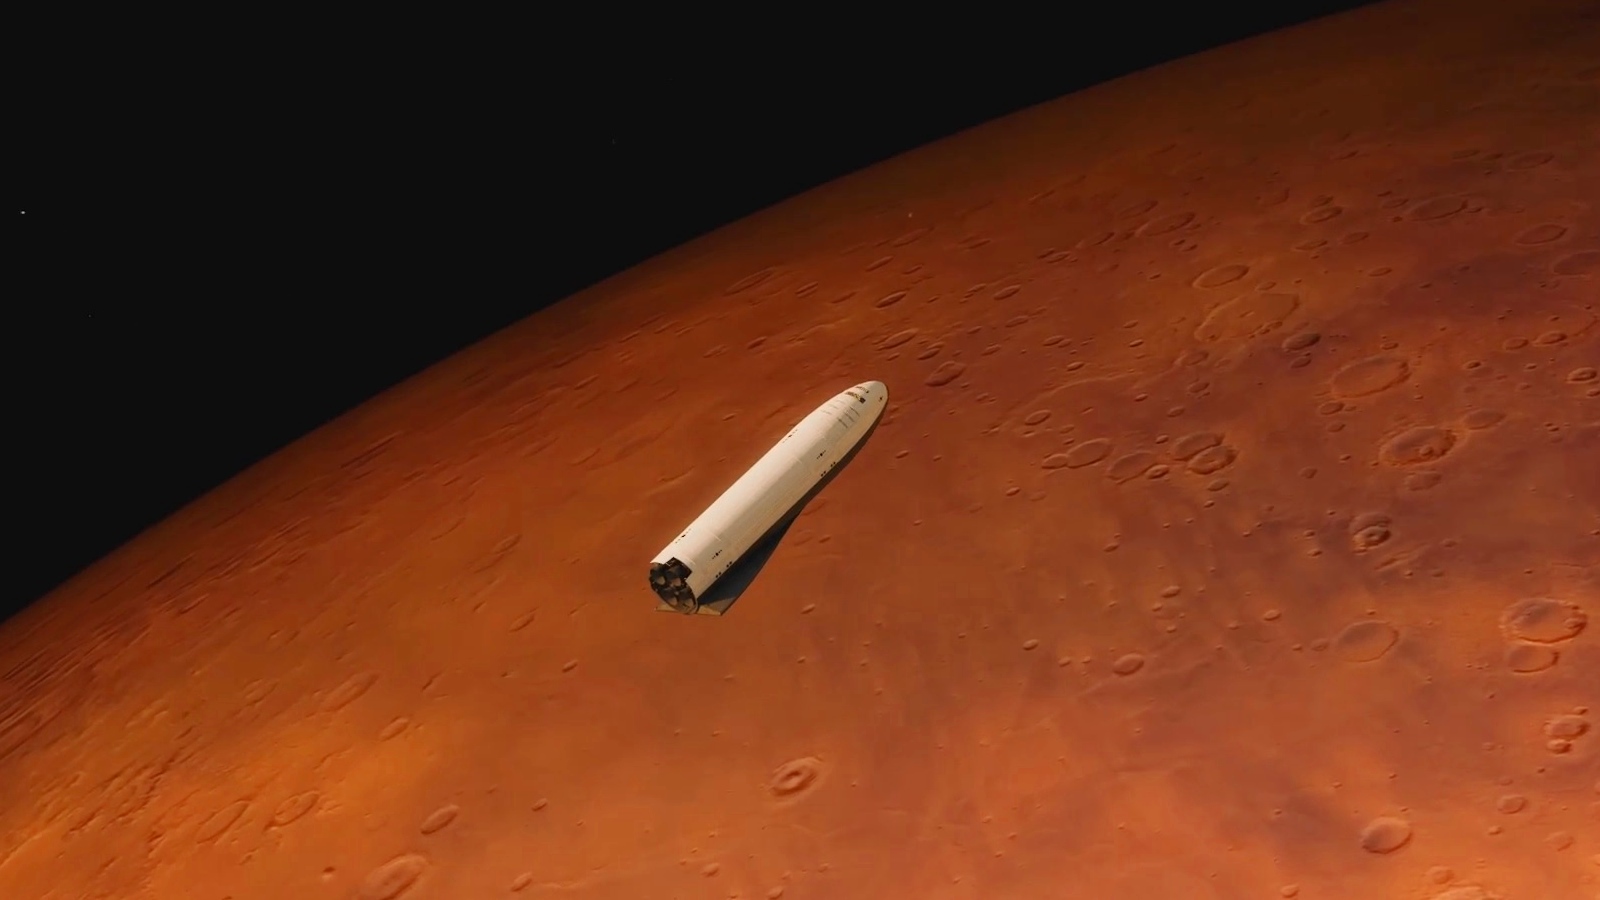 SpaceX BFR spaceship (BFS) approaching Mars